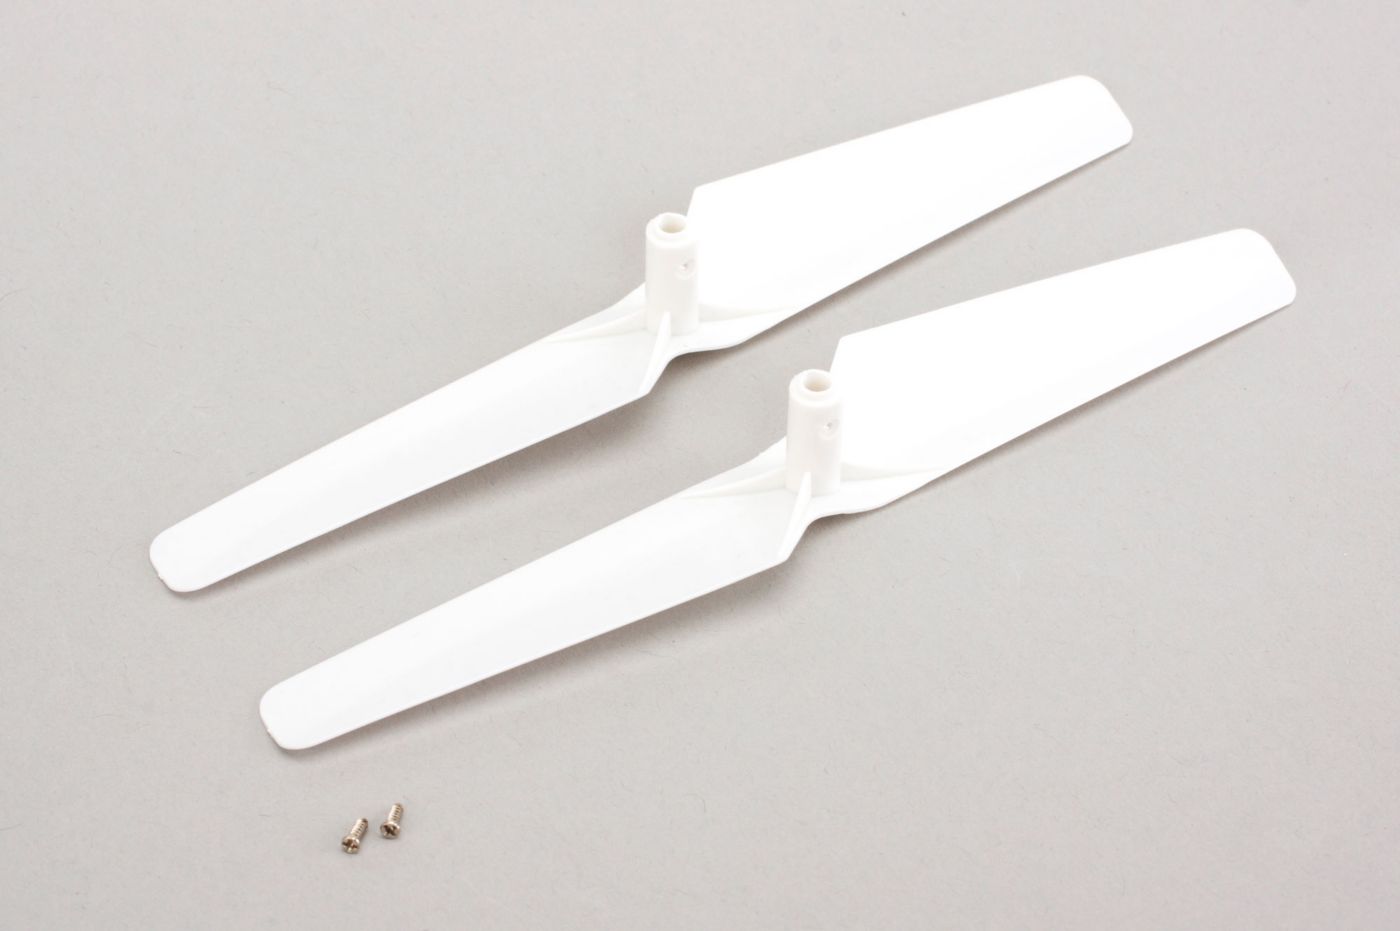 Propeller, Counter-Clockwise Rotation, White (2): mQX